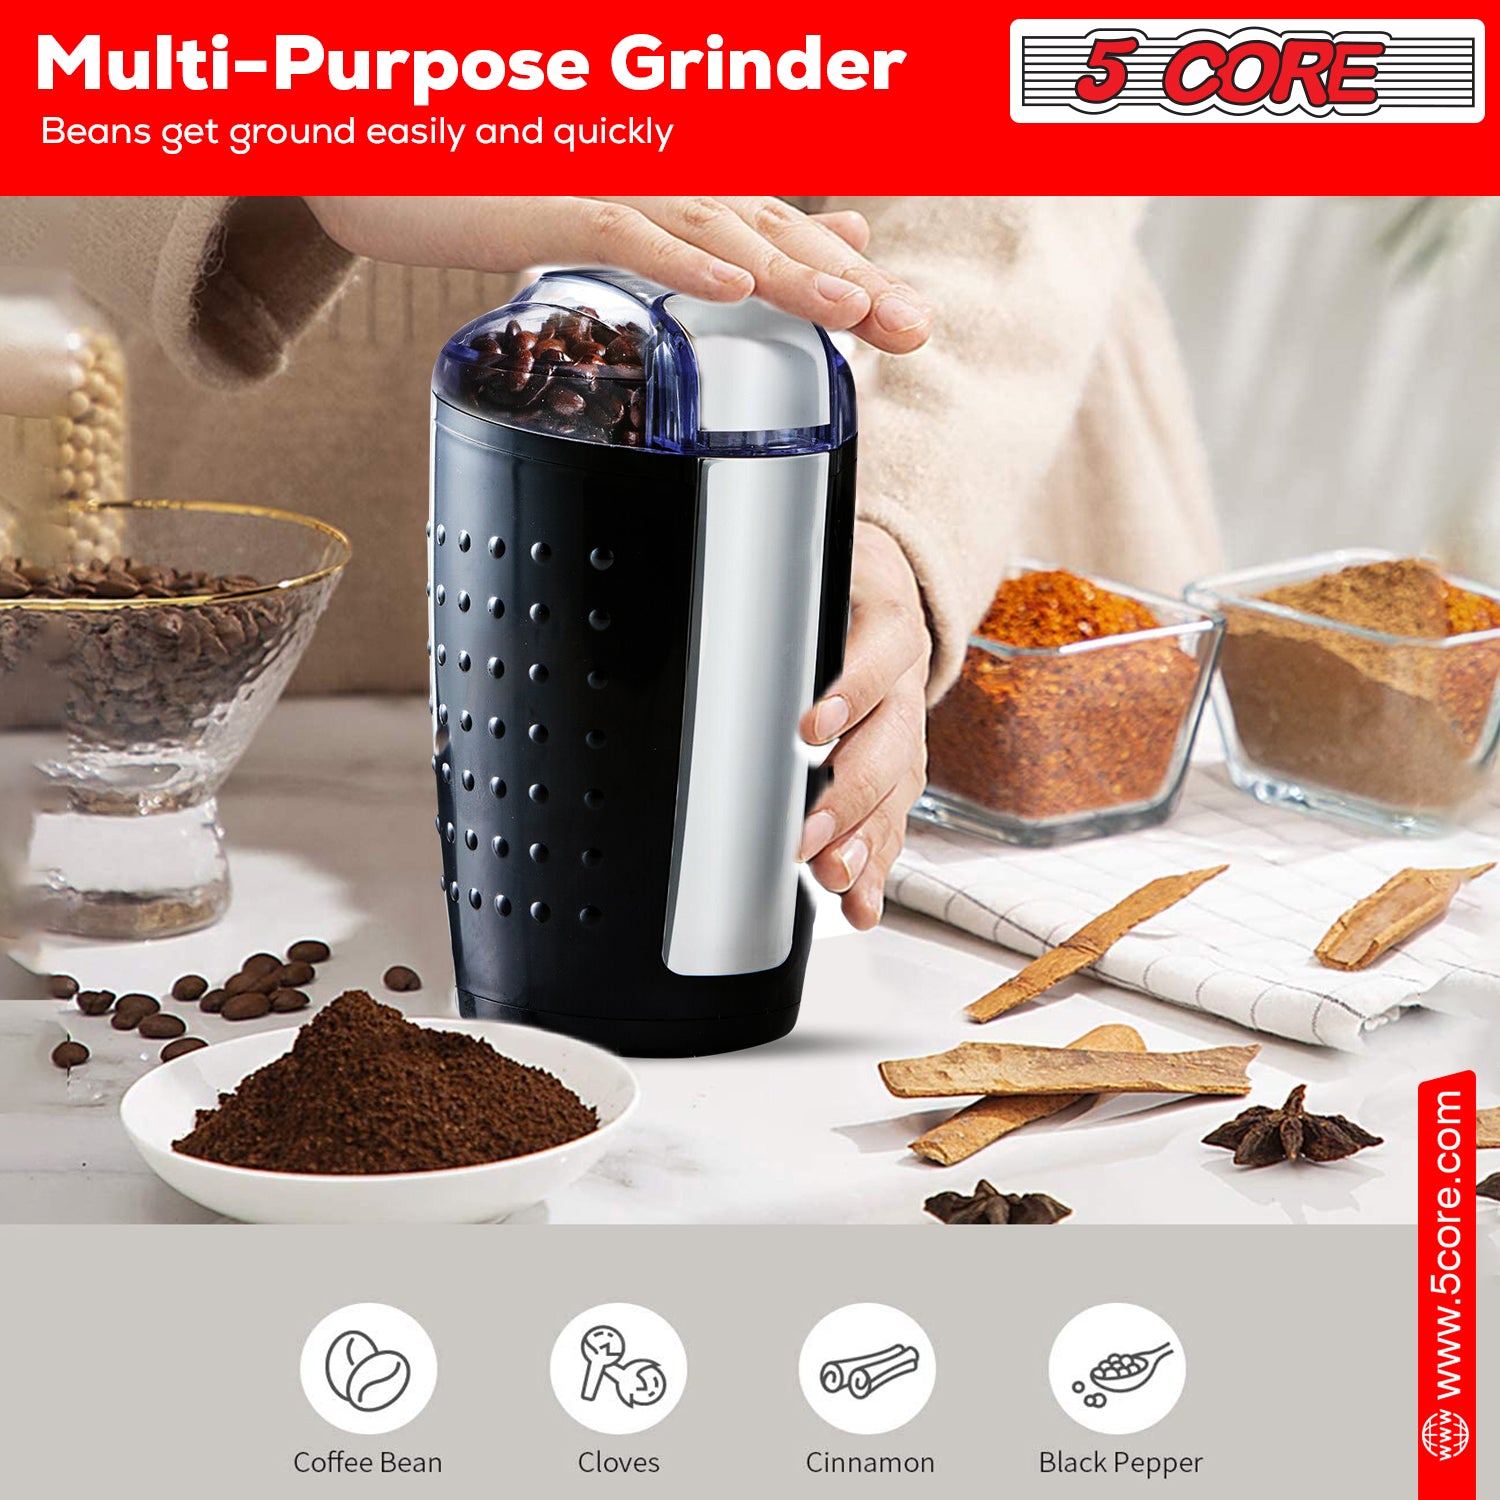 Elevate your kitchen essentials with the stylish and functional coffee grinder.